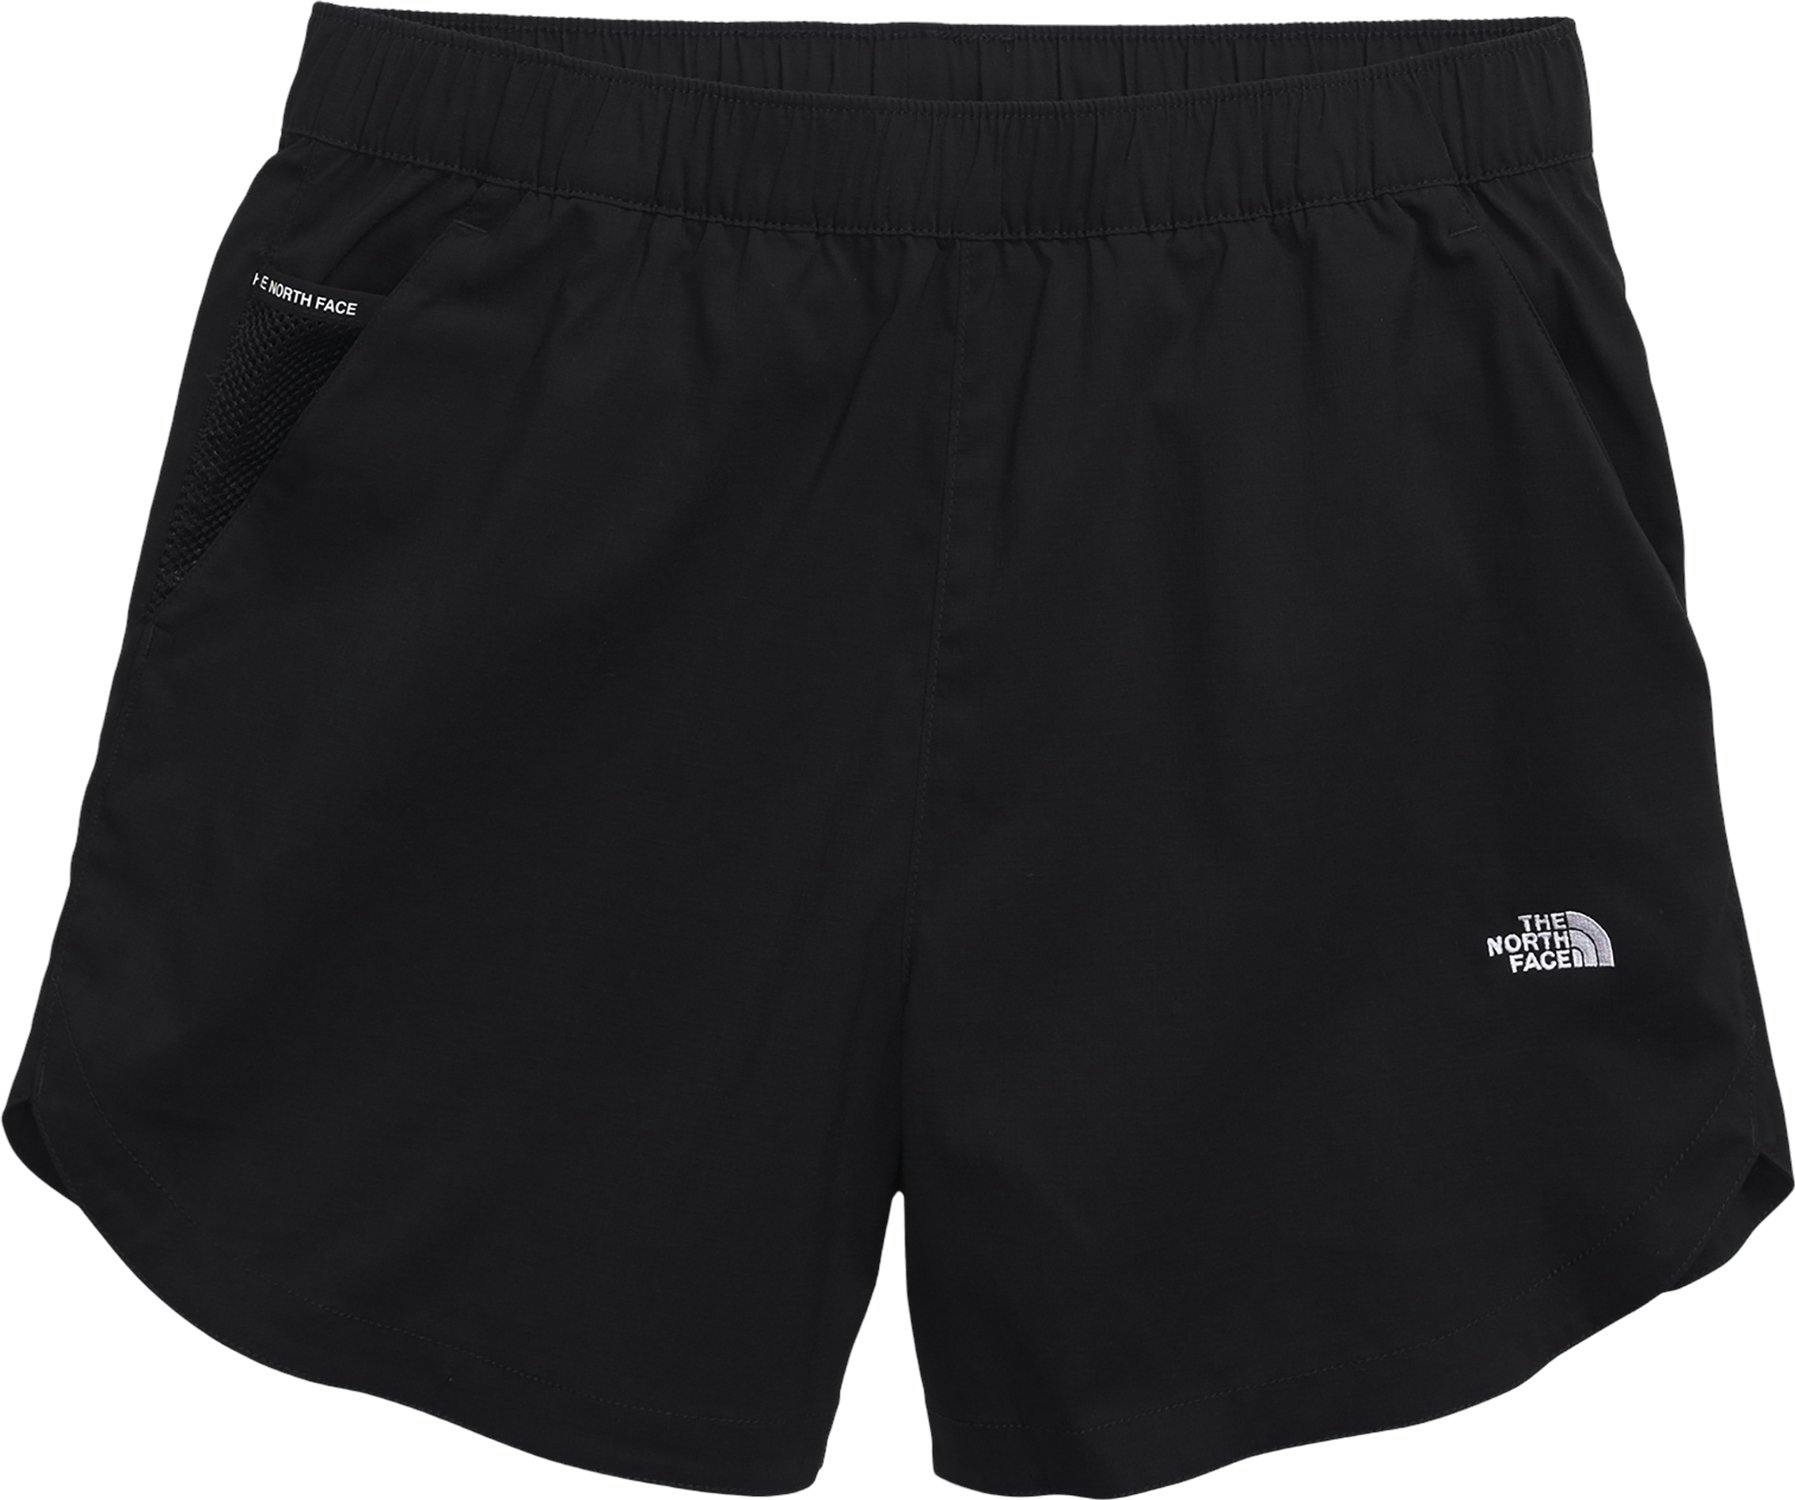 Product image for Class V Pathfinder Pull-On Short - Women’s